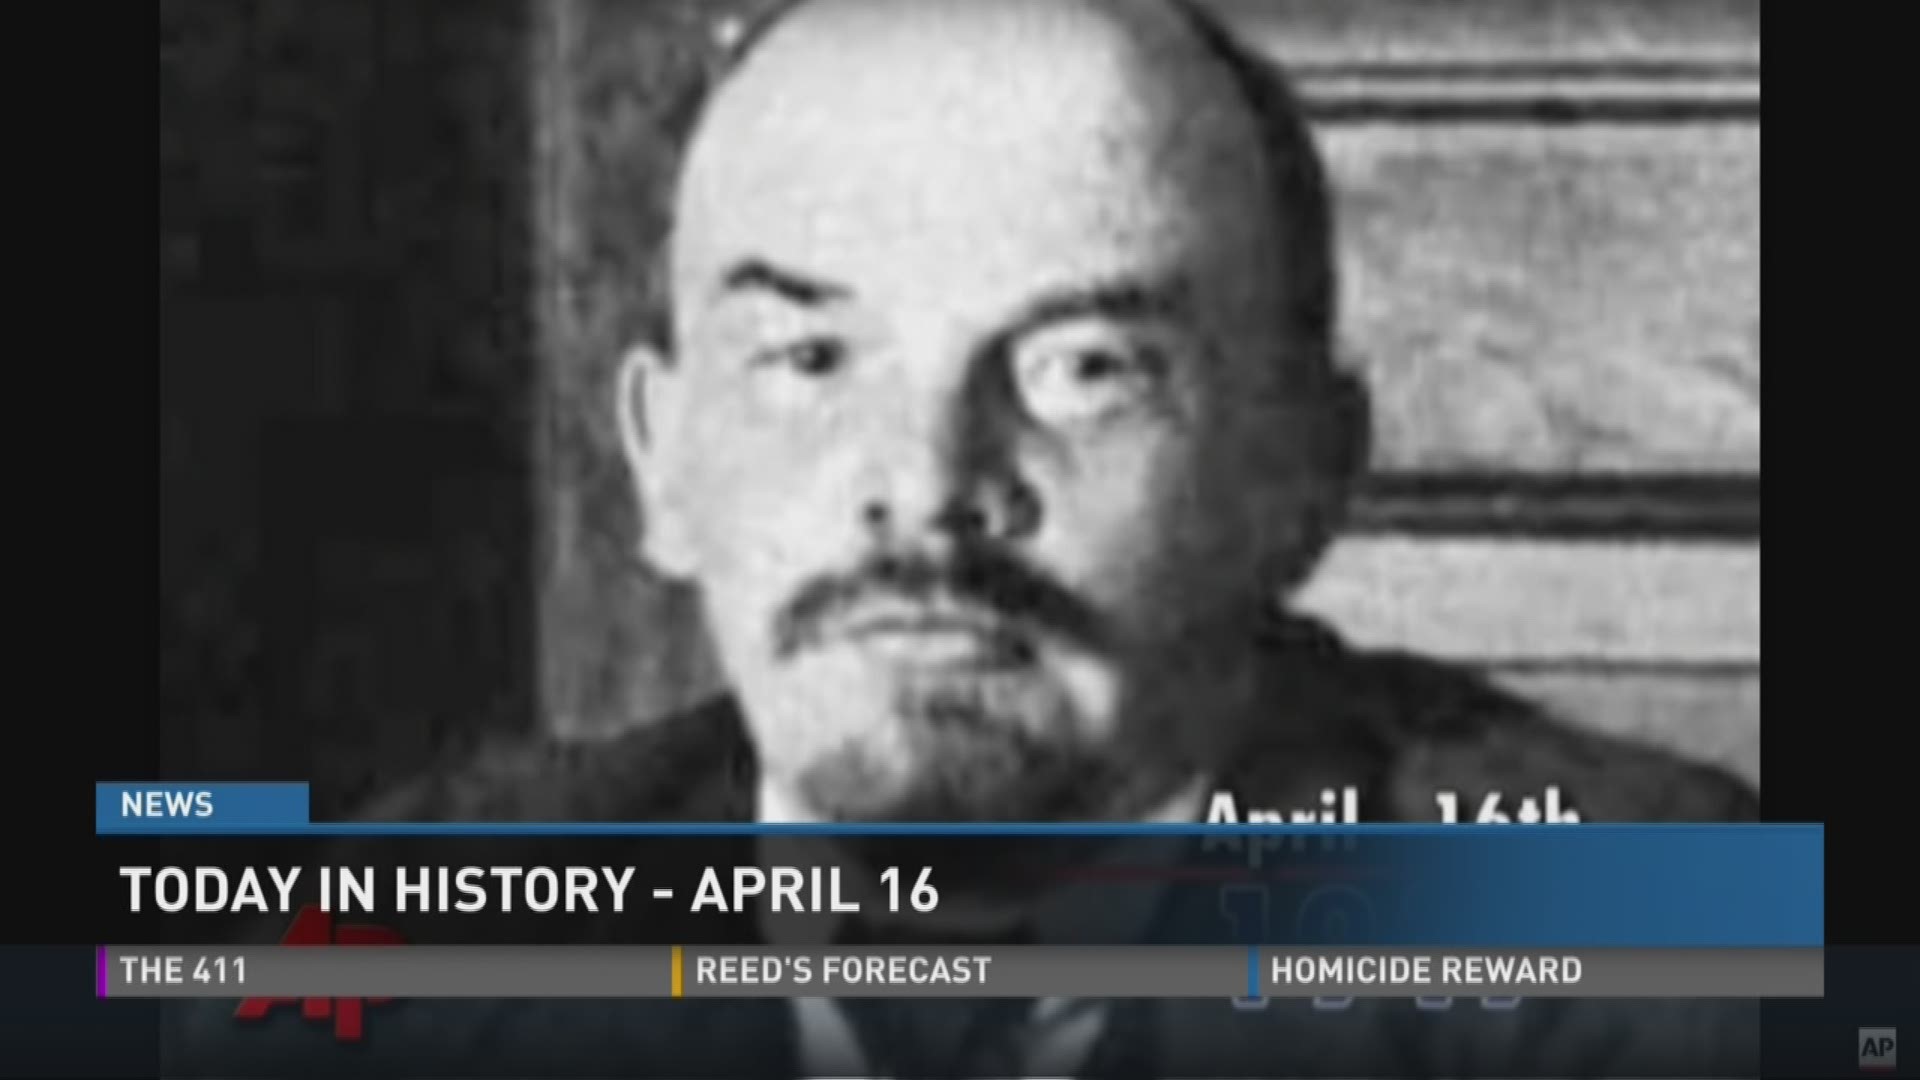 Today in history: April 16, 2016